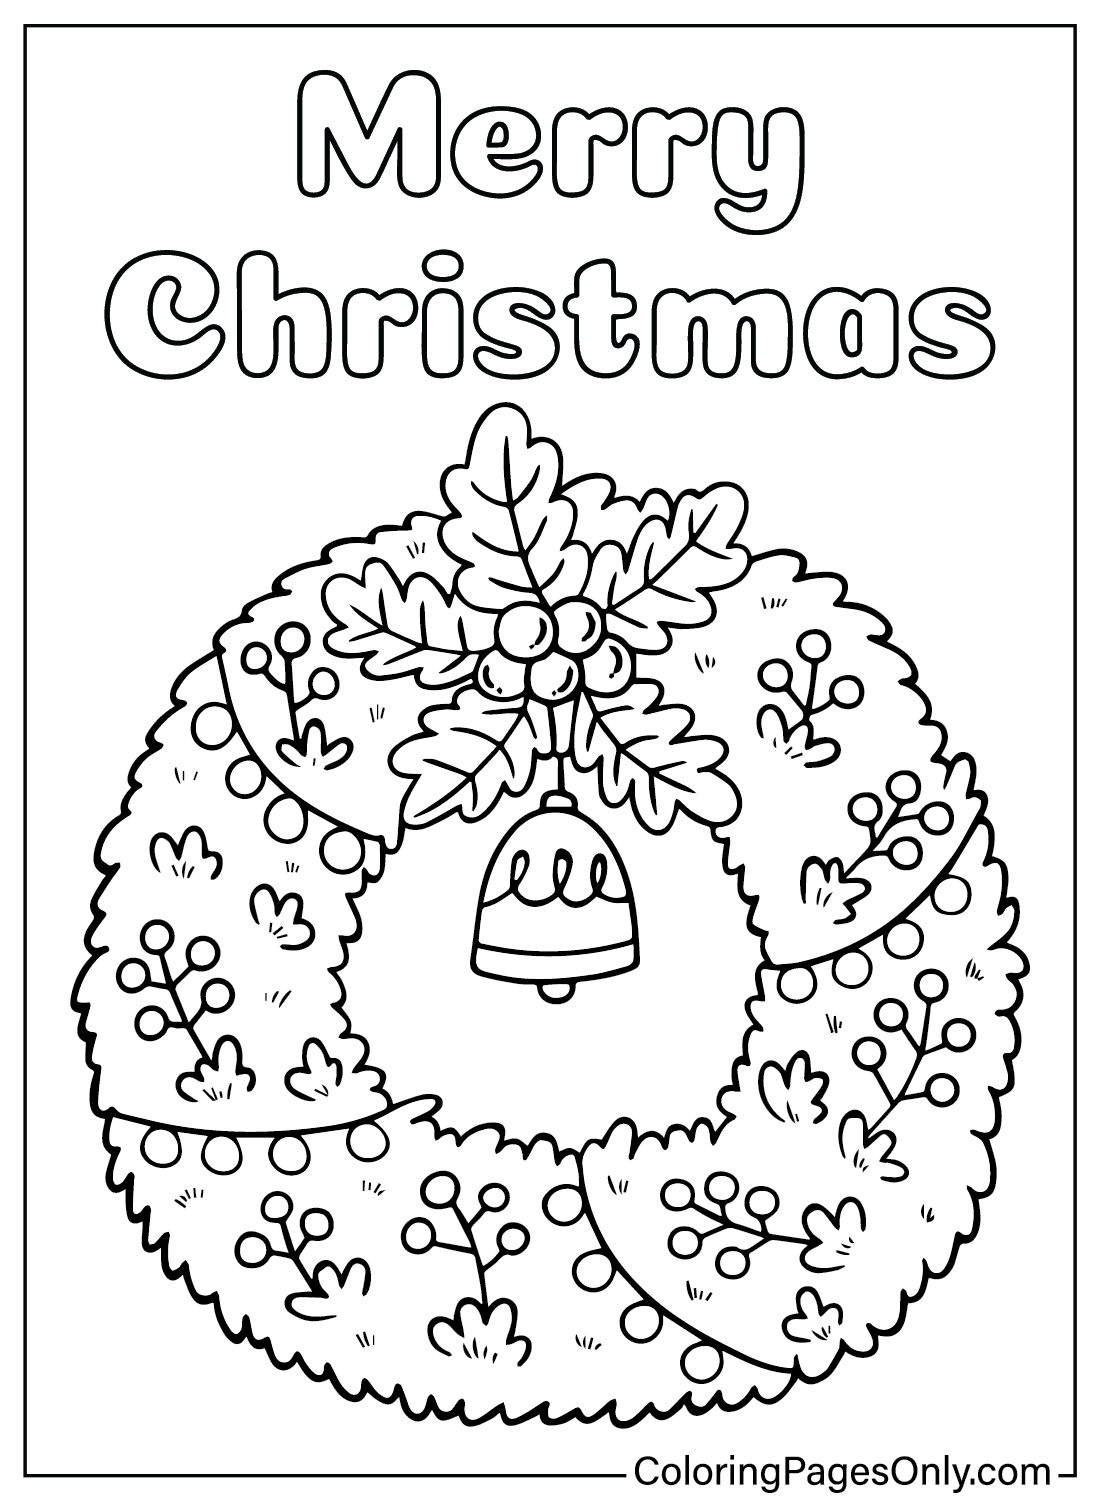 Christmas Wreath Free Printable Coloring Page from Christmas Wreath